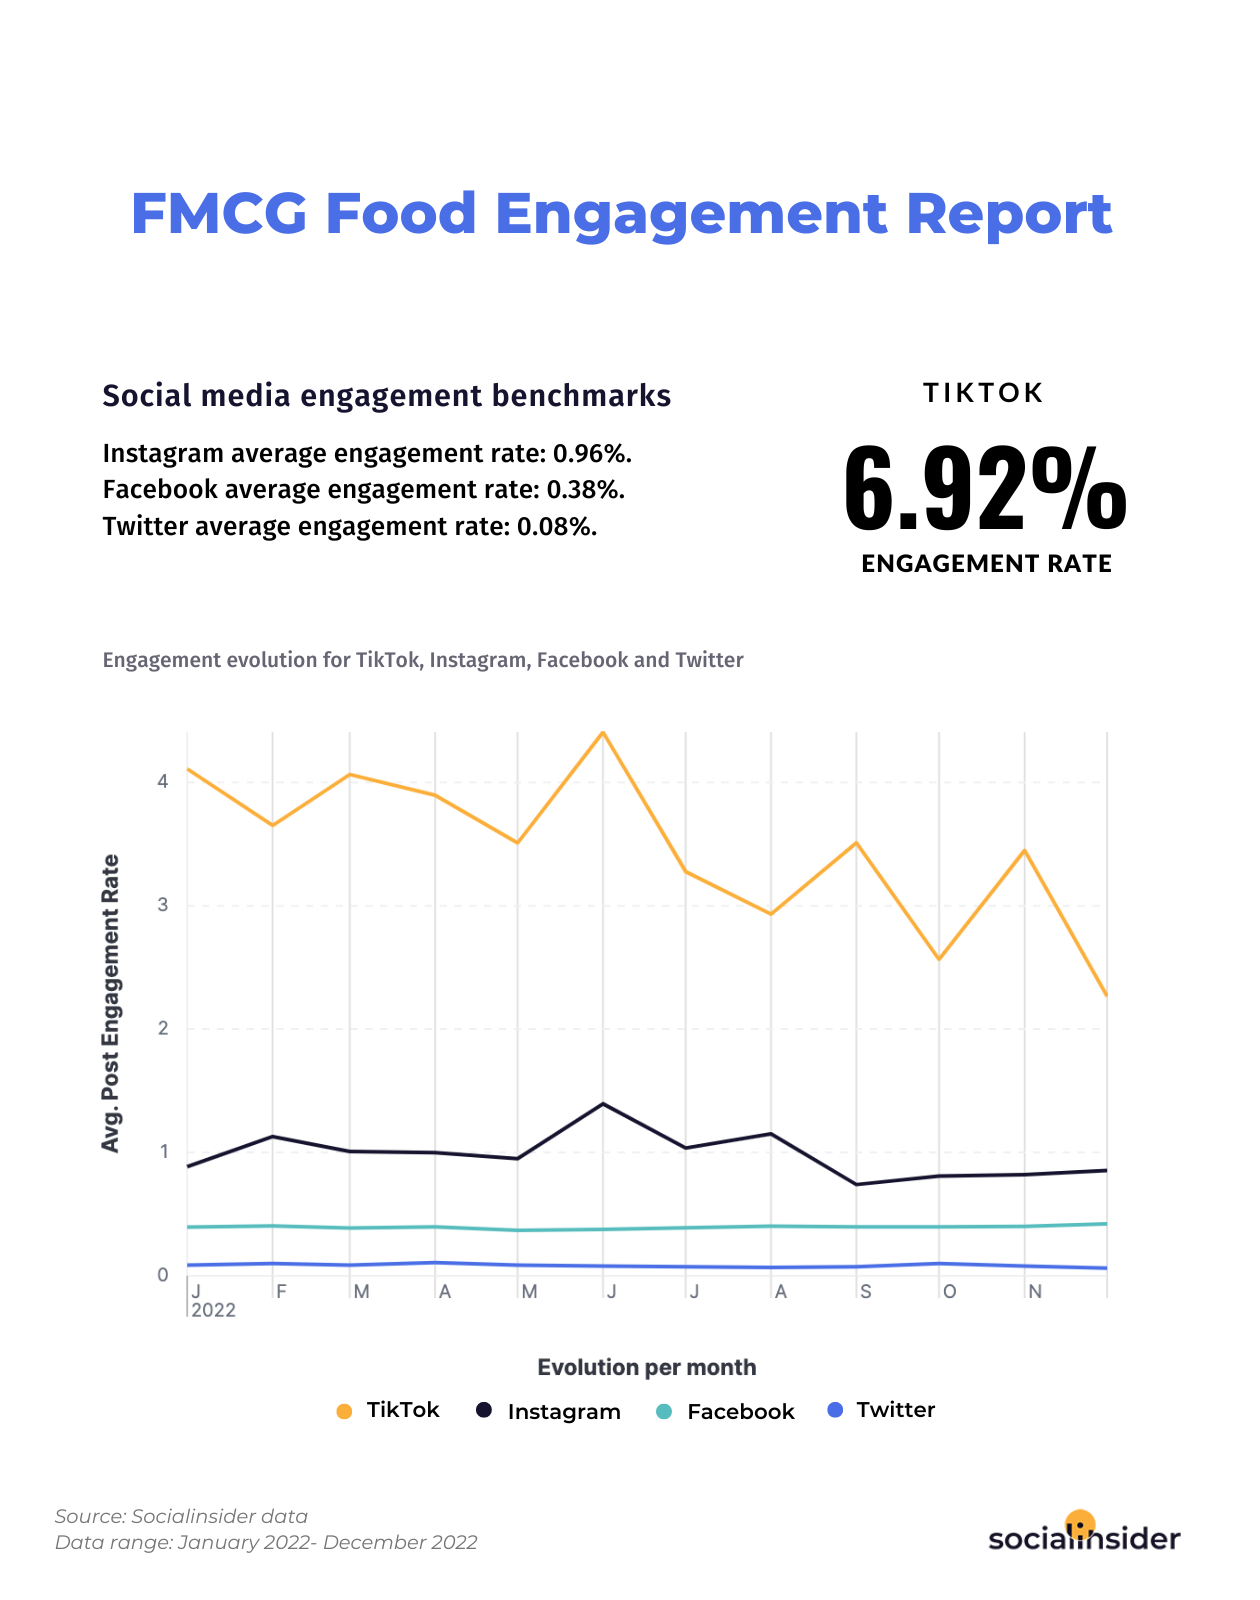 This is a chart indicating social media benchmarks and performance insights for businesses within the fmcg - food industry.